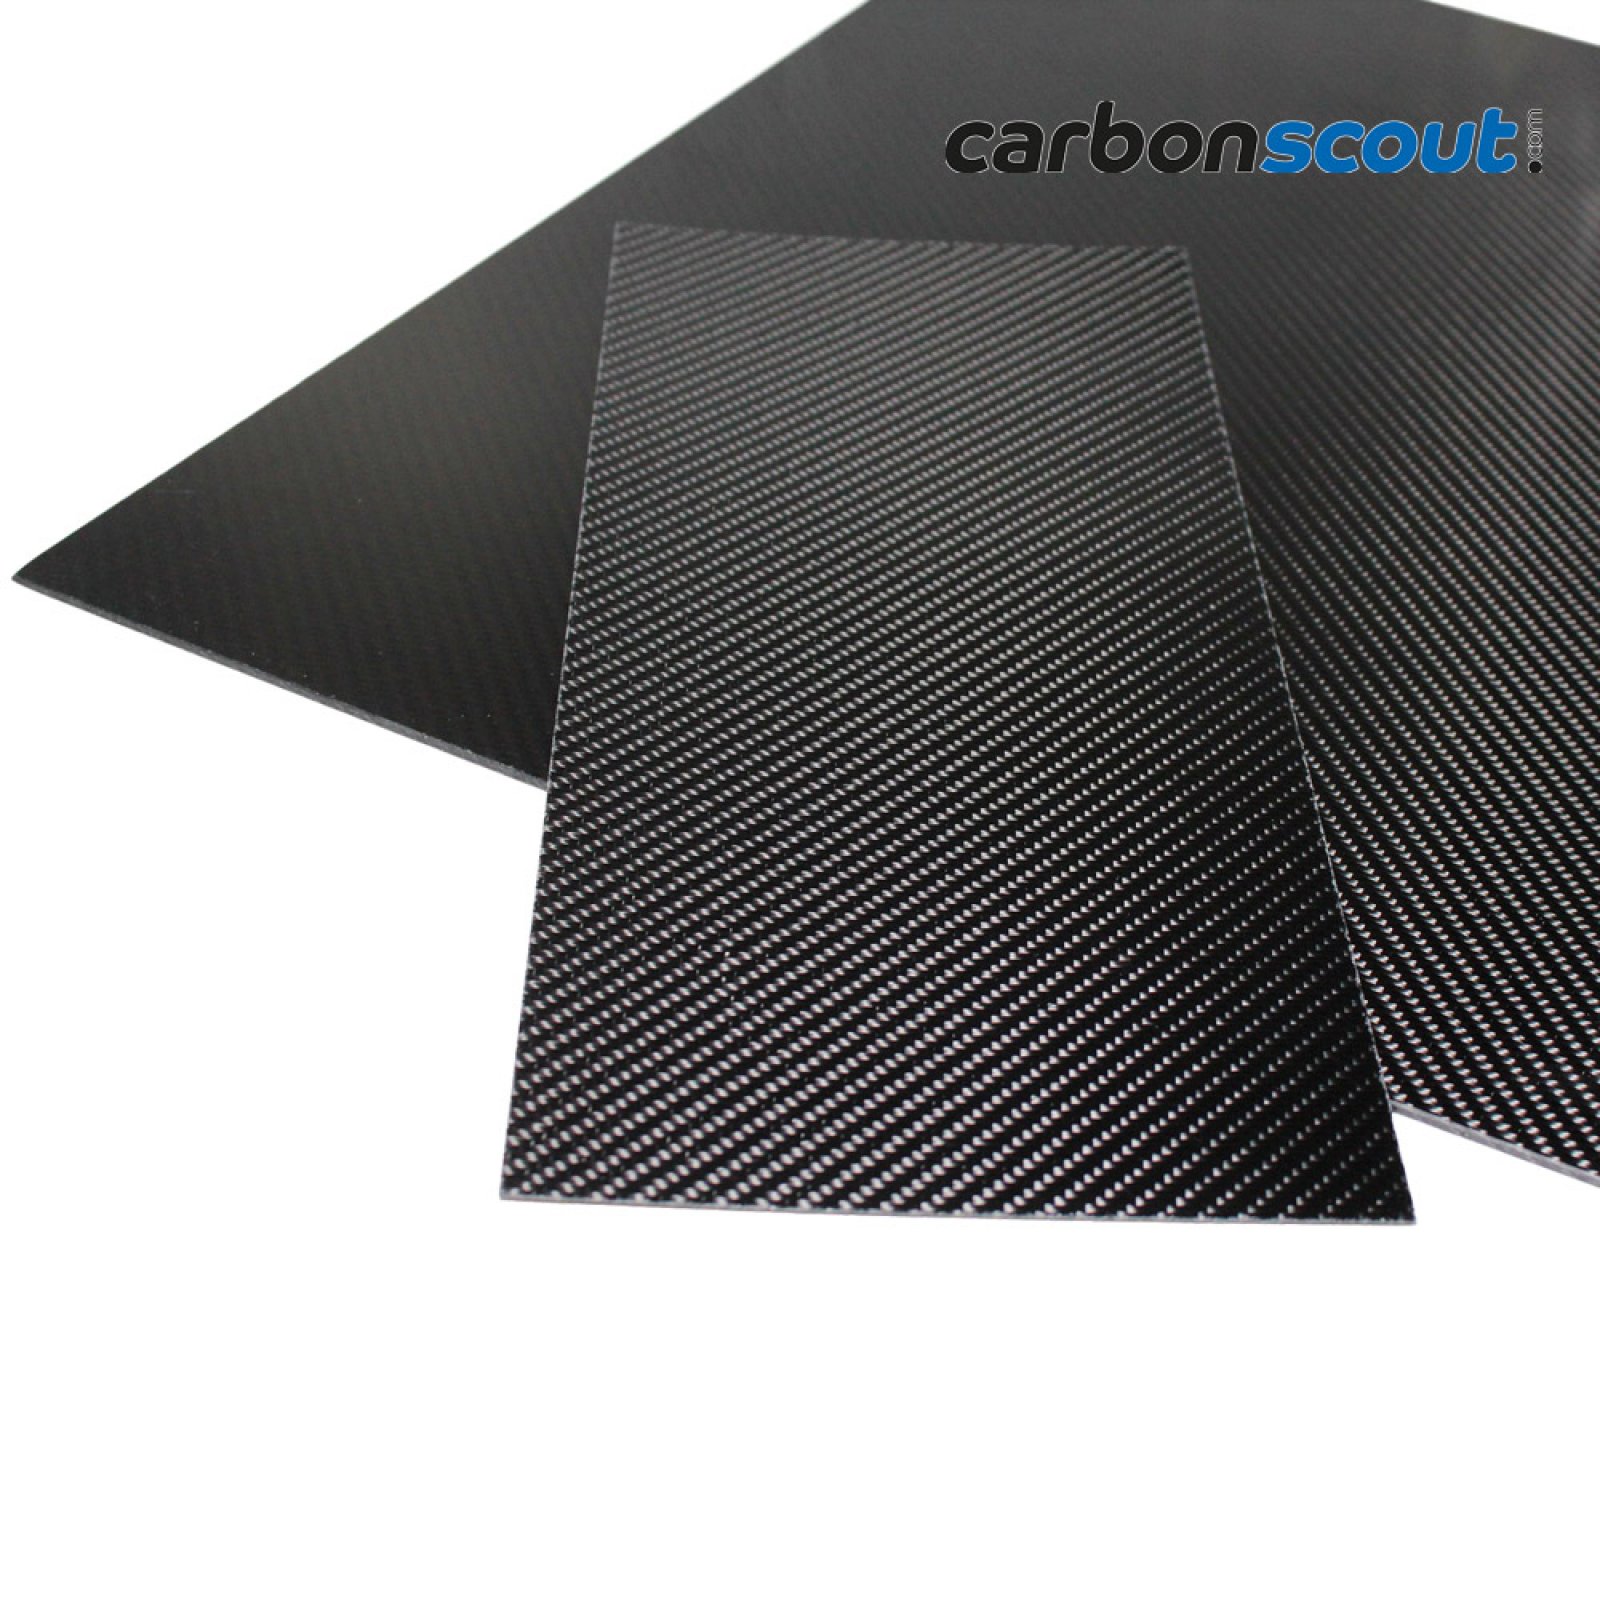 Carbon thermoplastic organo sheets